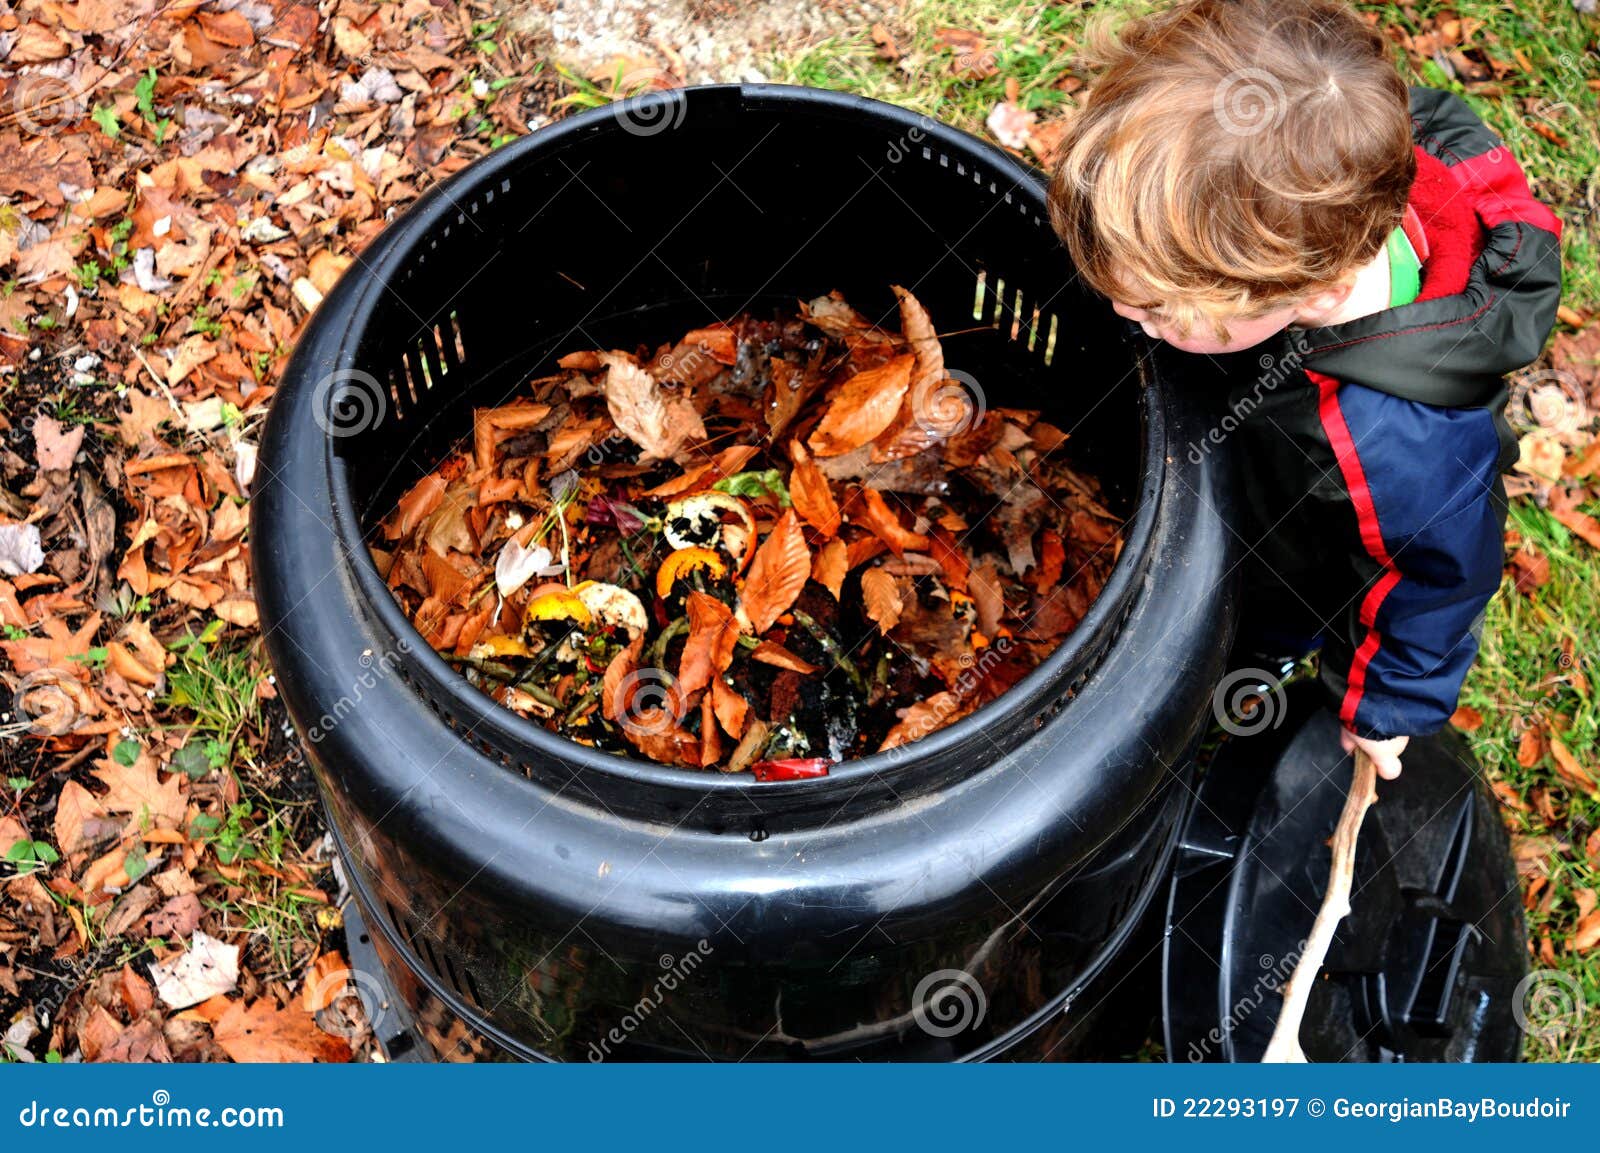 child looking in compost bin